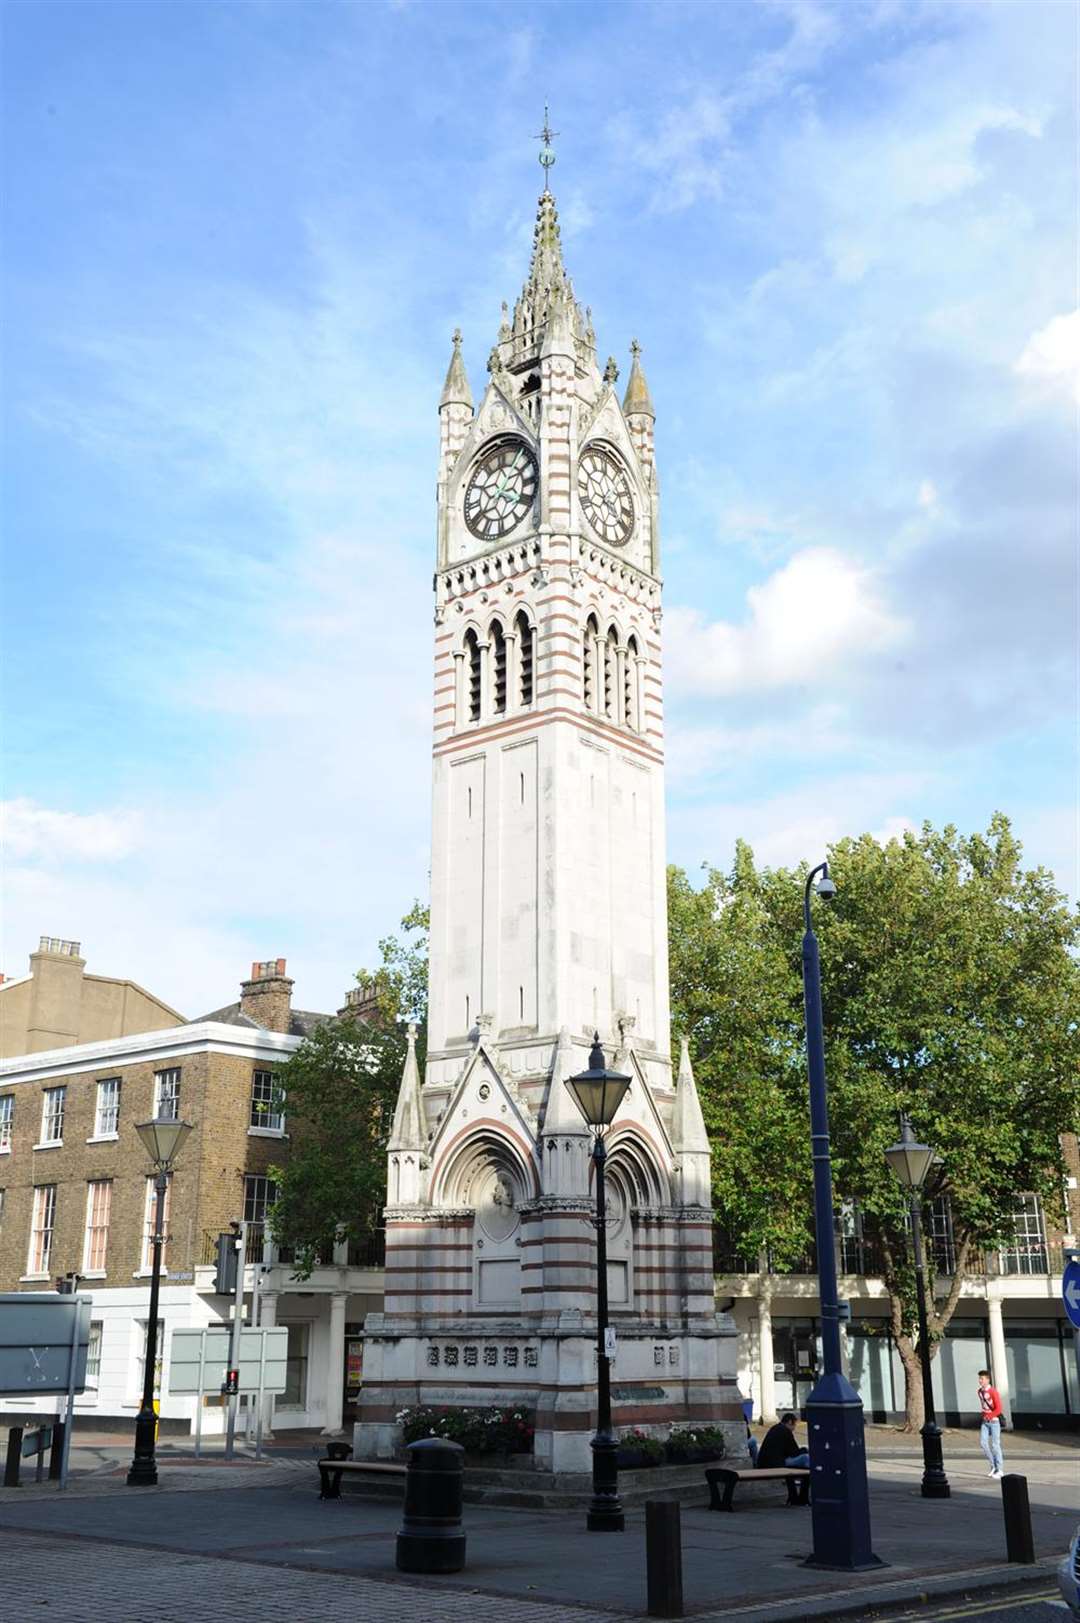 Historic Gravesend clock tower faces timely clean-up